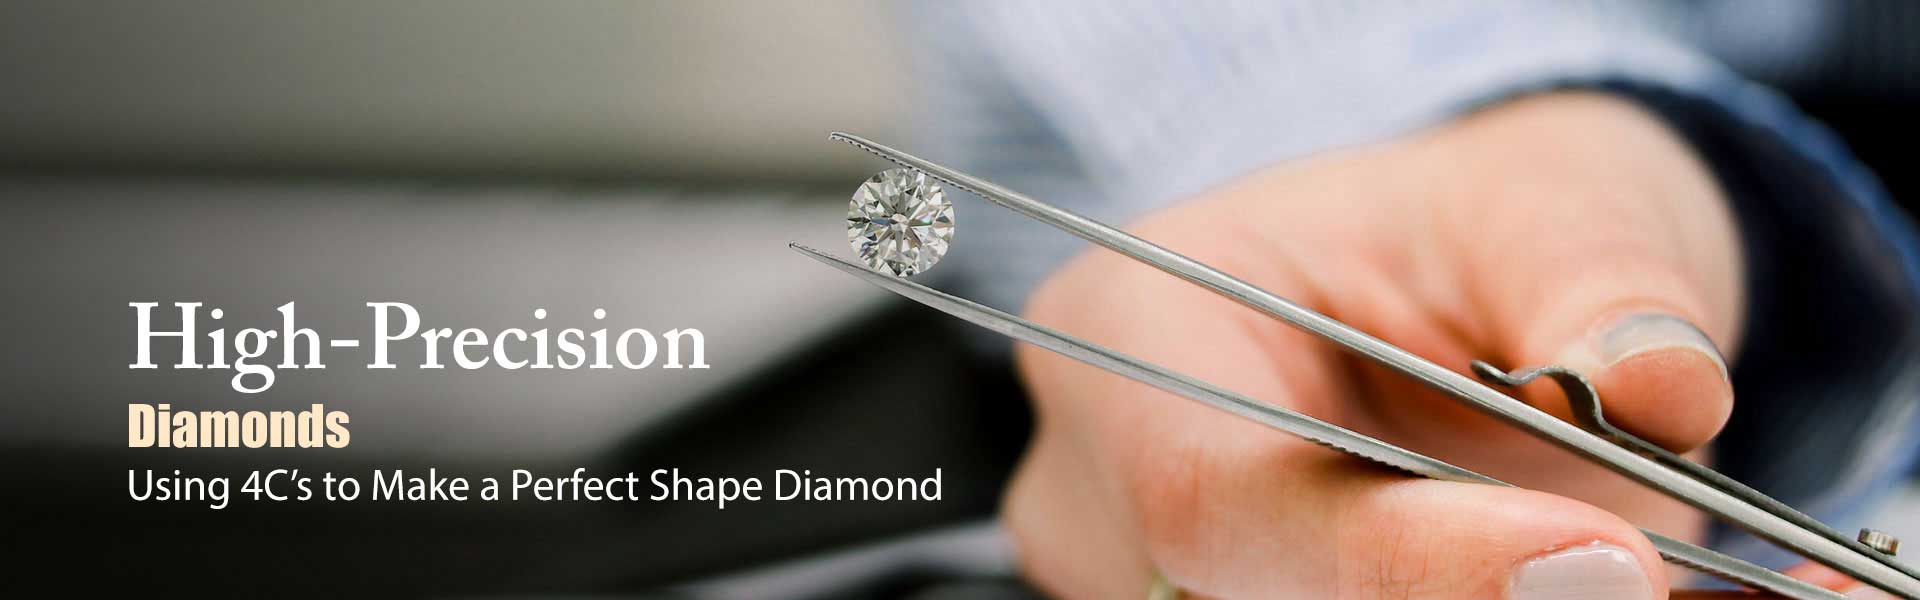  Certified Diamond  Manufacturers in Wyoming